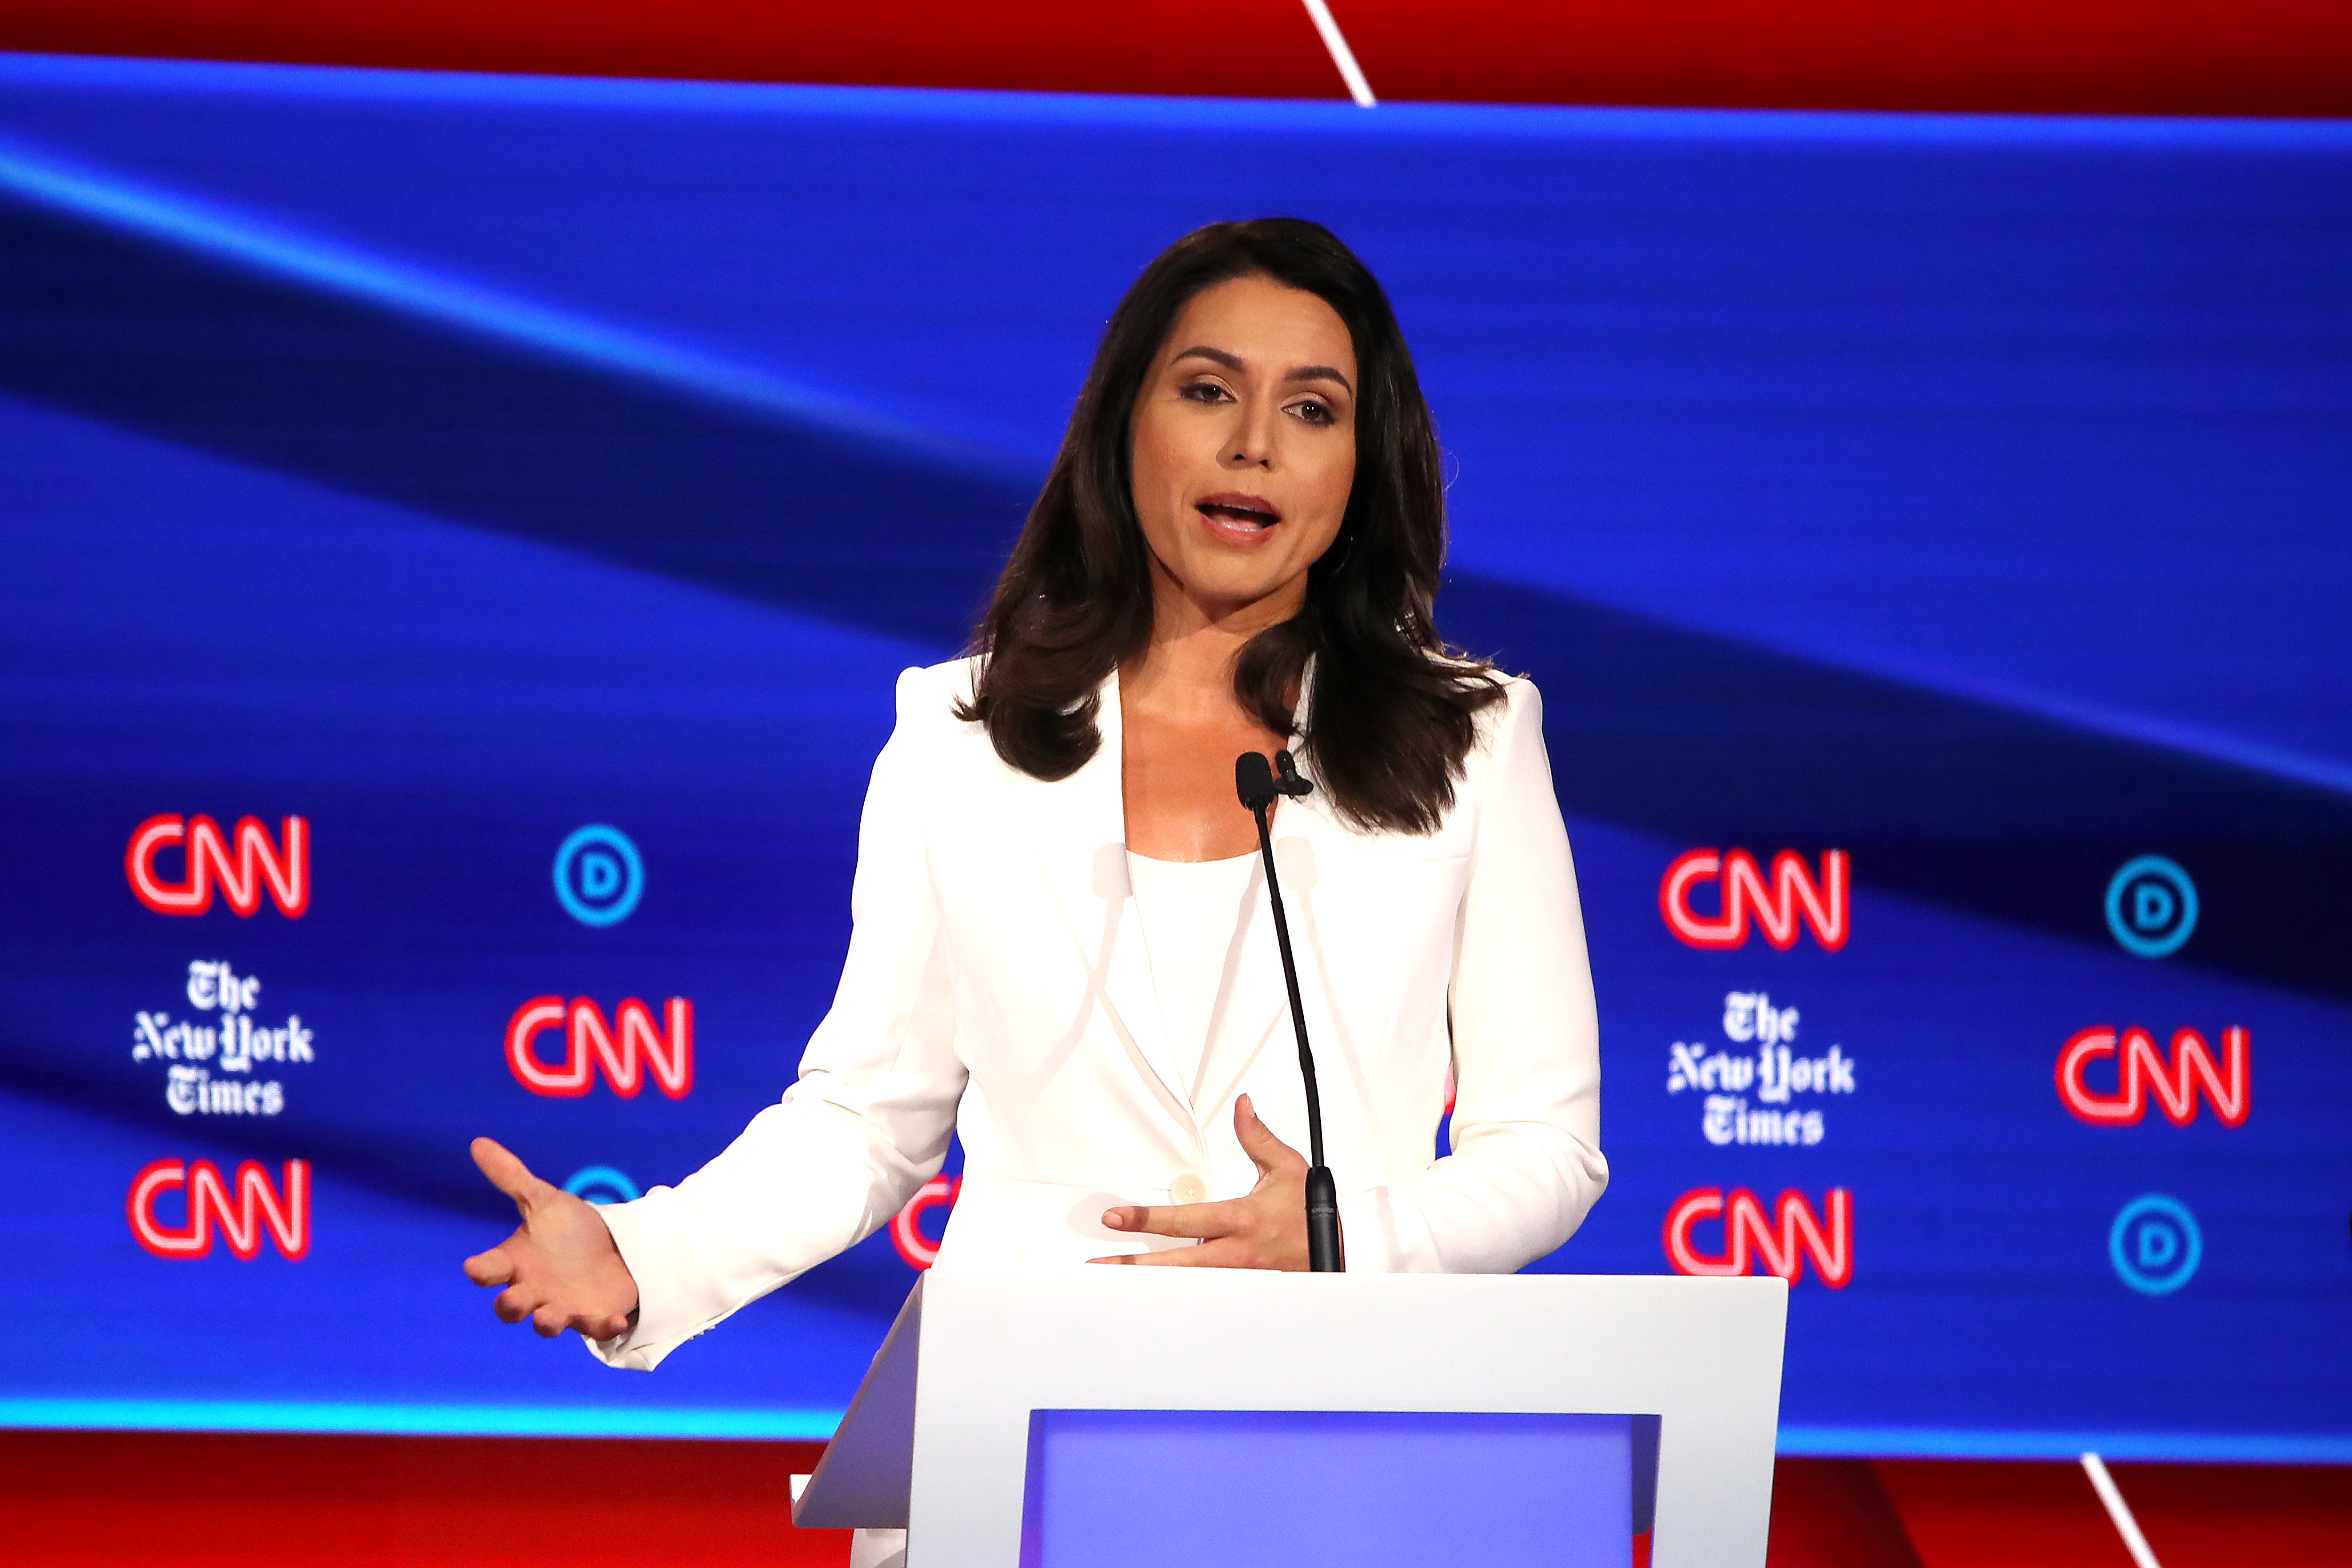 WESTERVILLE, OHIO - OCTOBER 15: Rep. Tulsi Gabbard (D-HI) speaks during the Democratic Presidential Debate at Otterbein University on October 15, 2019 in Westerville, Ohio. A record 12 presidential hopefuls are participating in the debate hosted by CNN and The New York Times. (Photo by Win McNamee/Getty Images)